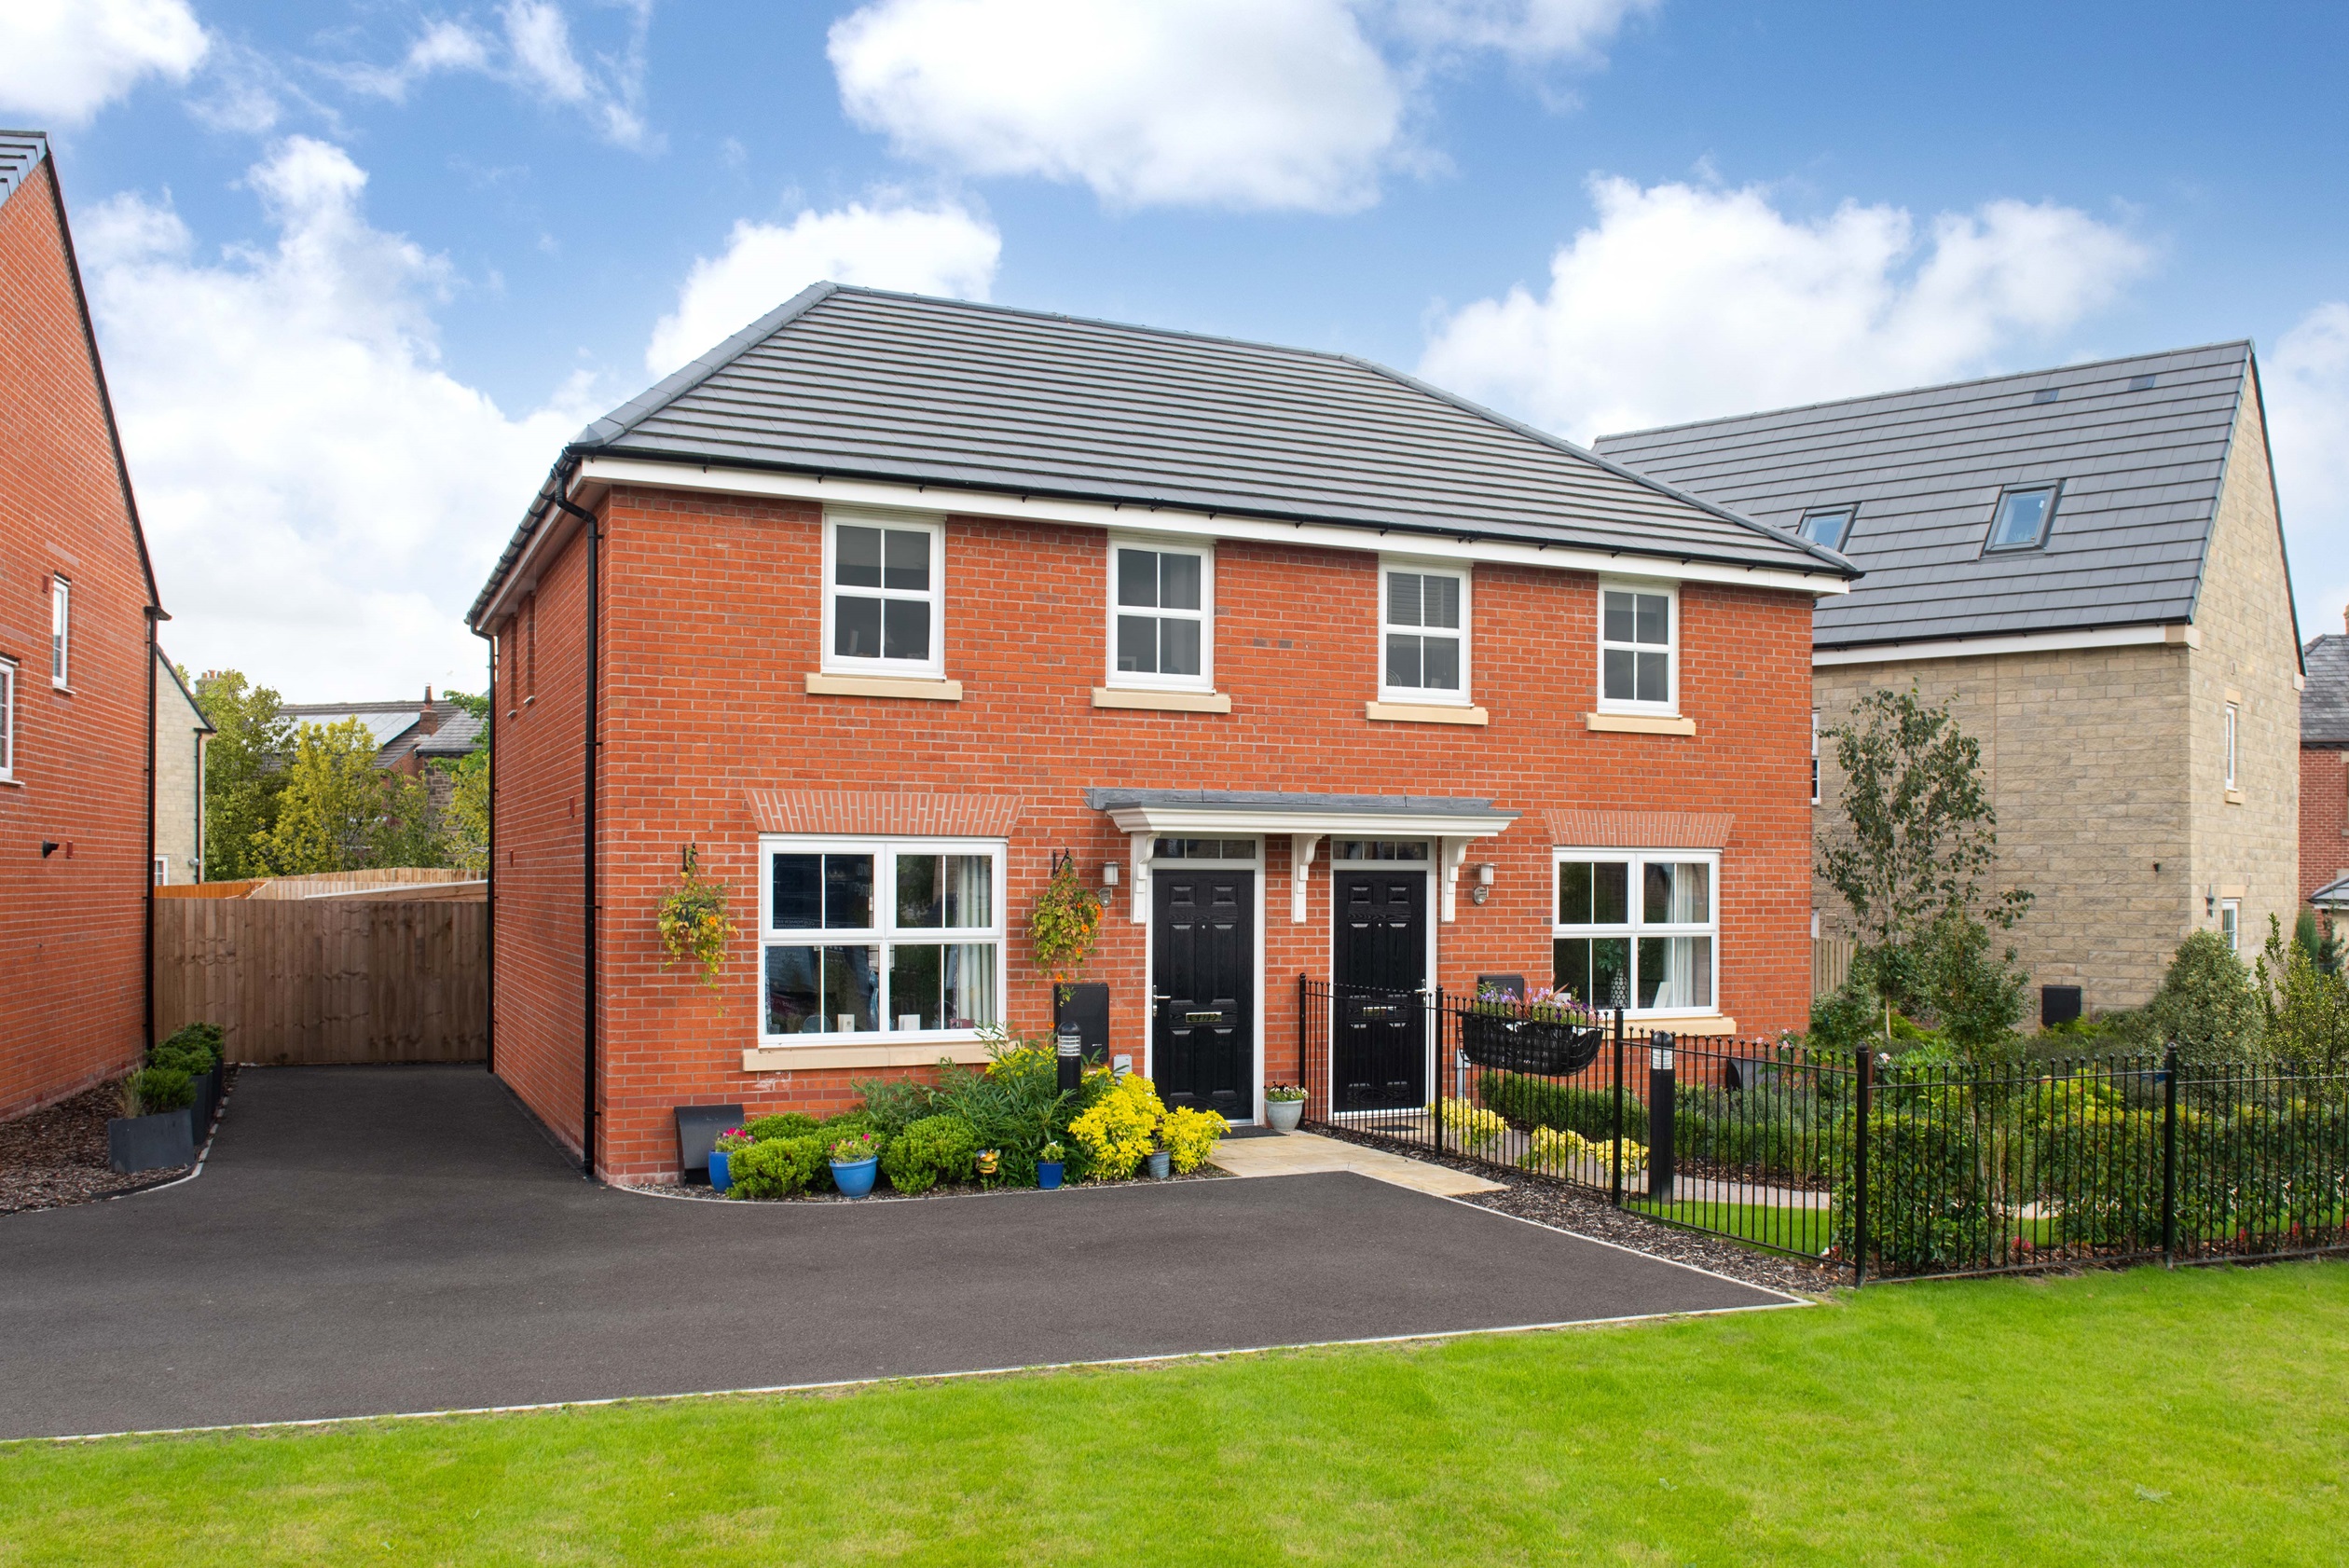 Property 1 of 8. External View Of The Archford Show Home At Inglewhite Meadows